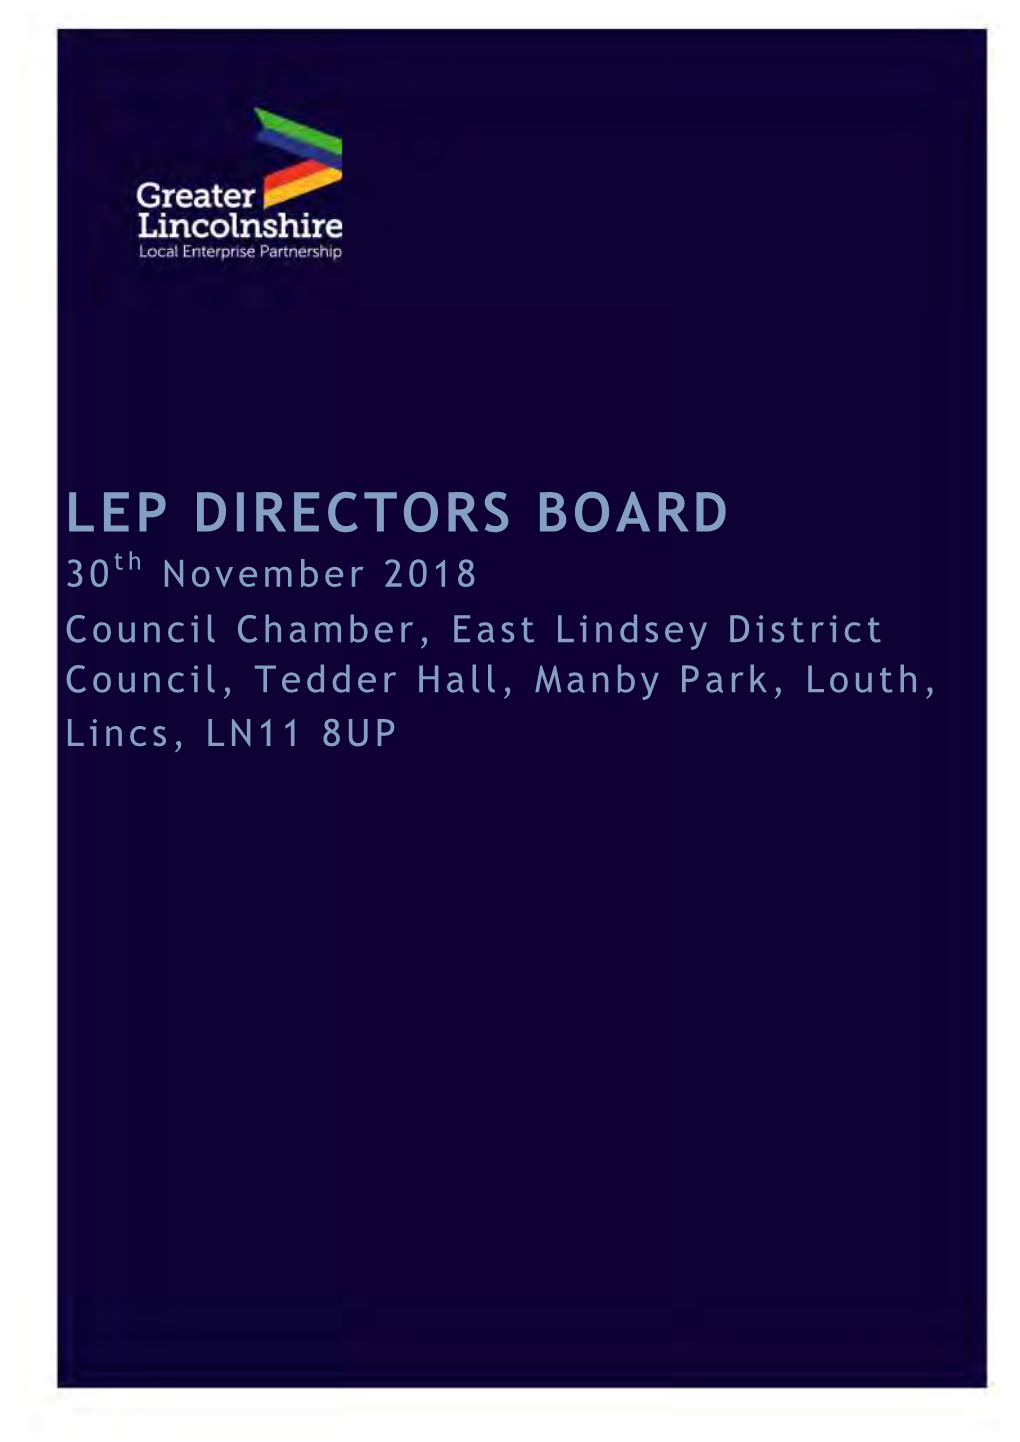 LEP DIRECTORS BOARD 30Th November 2018 Council Chamber, East Lindsey District Council, Tedder Hall, Manby Park, Louth, Lincs, LN11 8UP Paper 0 - Agenda